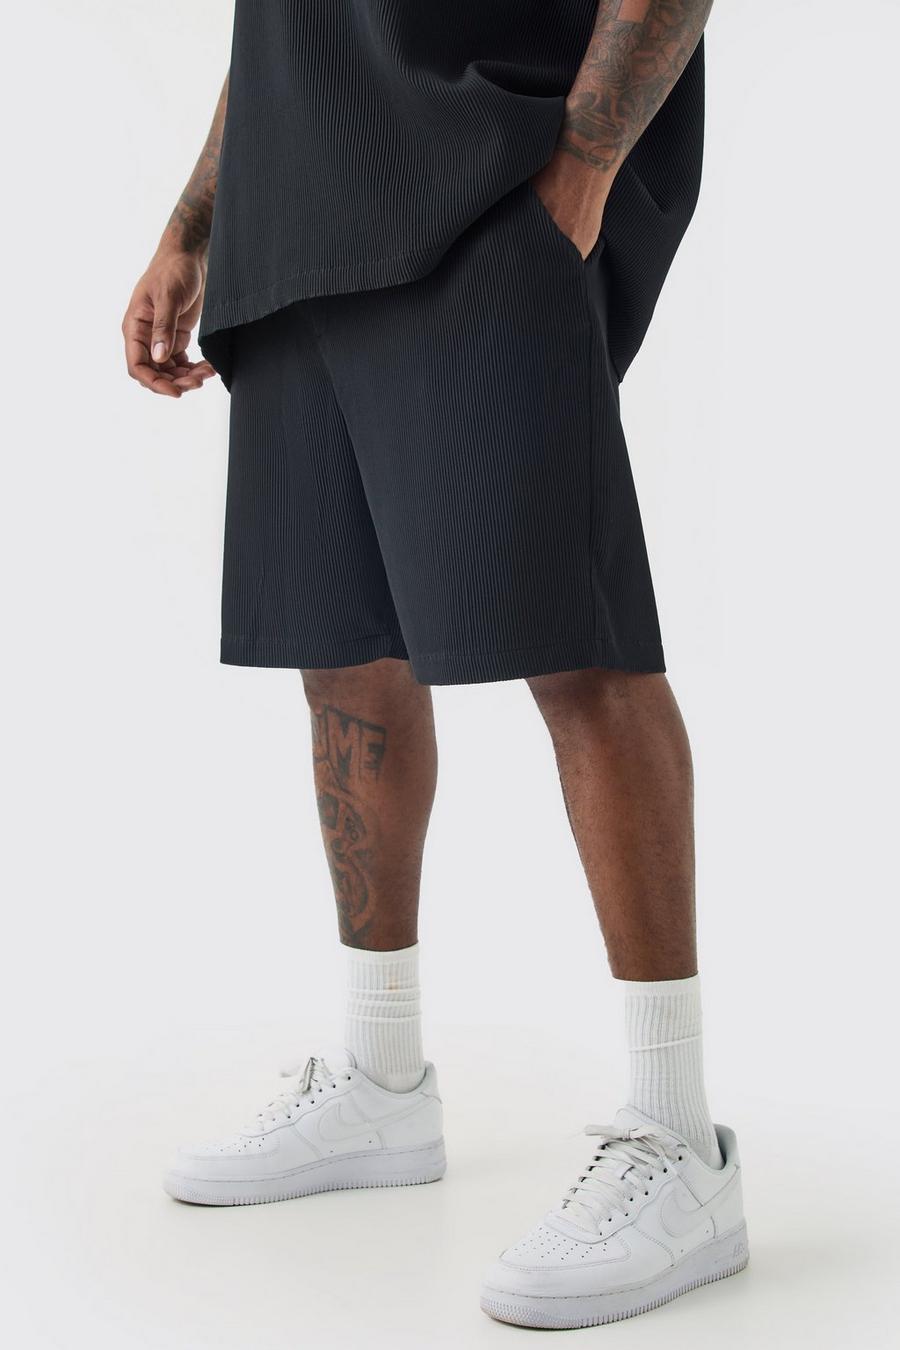 Black Keep cool during the warmer months and look good doing it in these black waffle shorts from